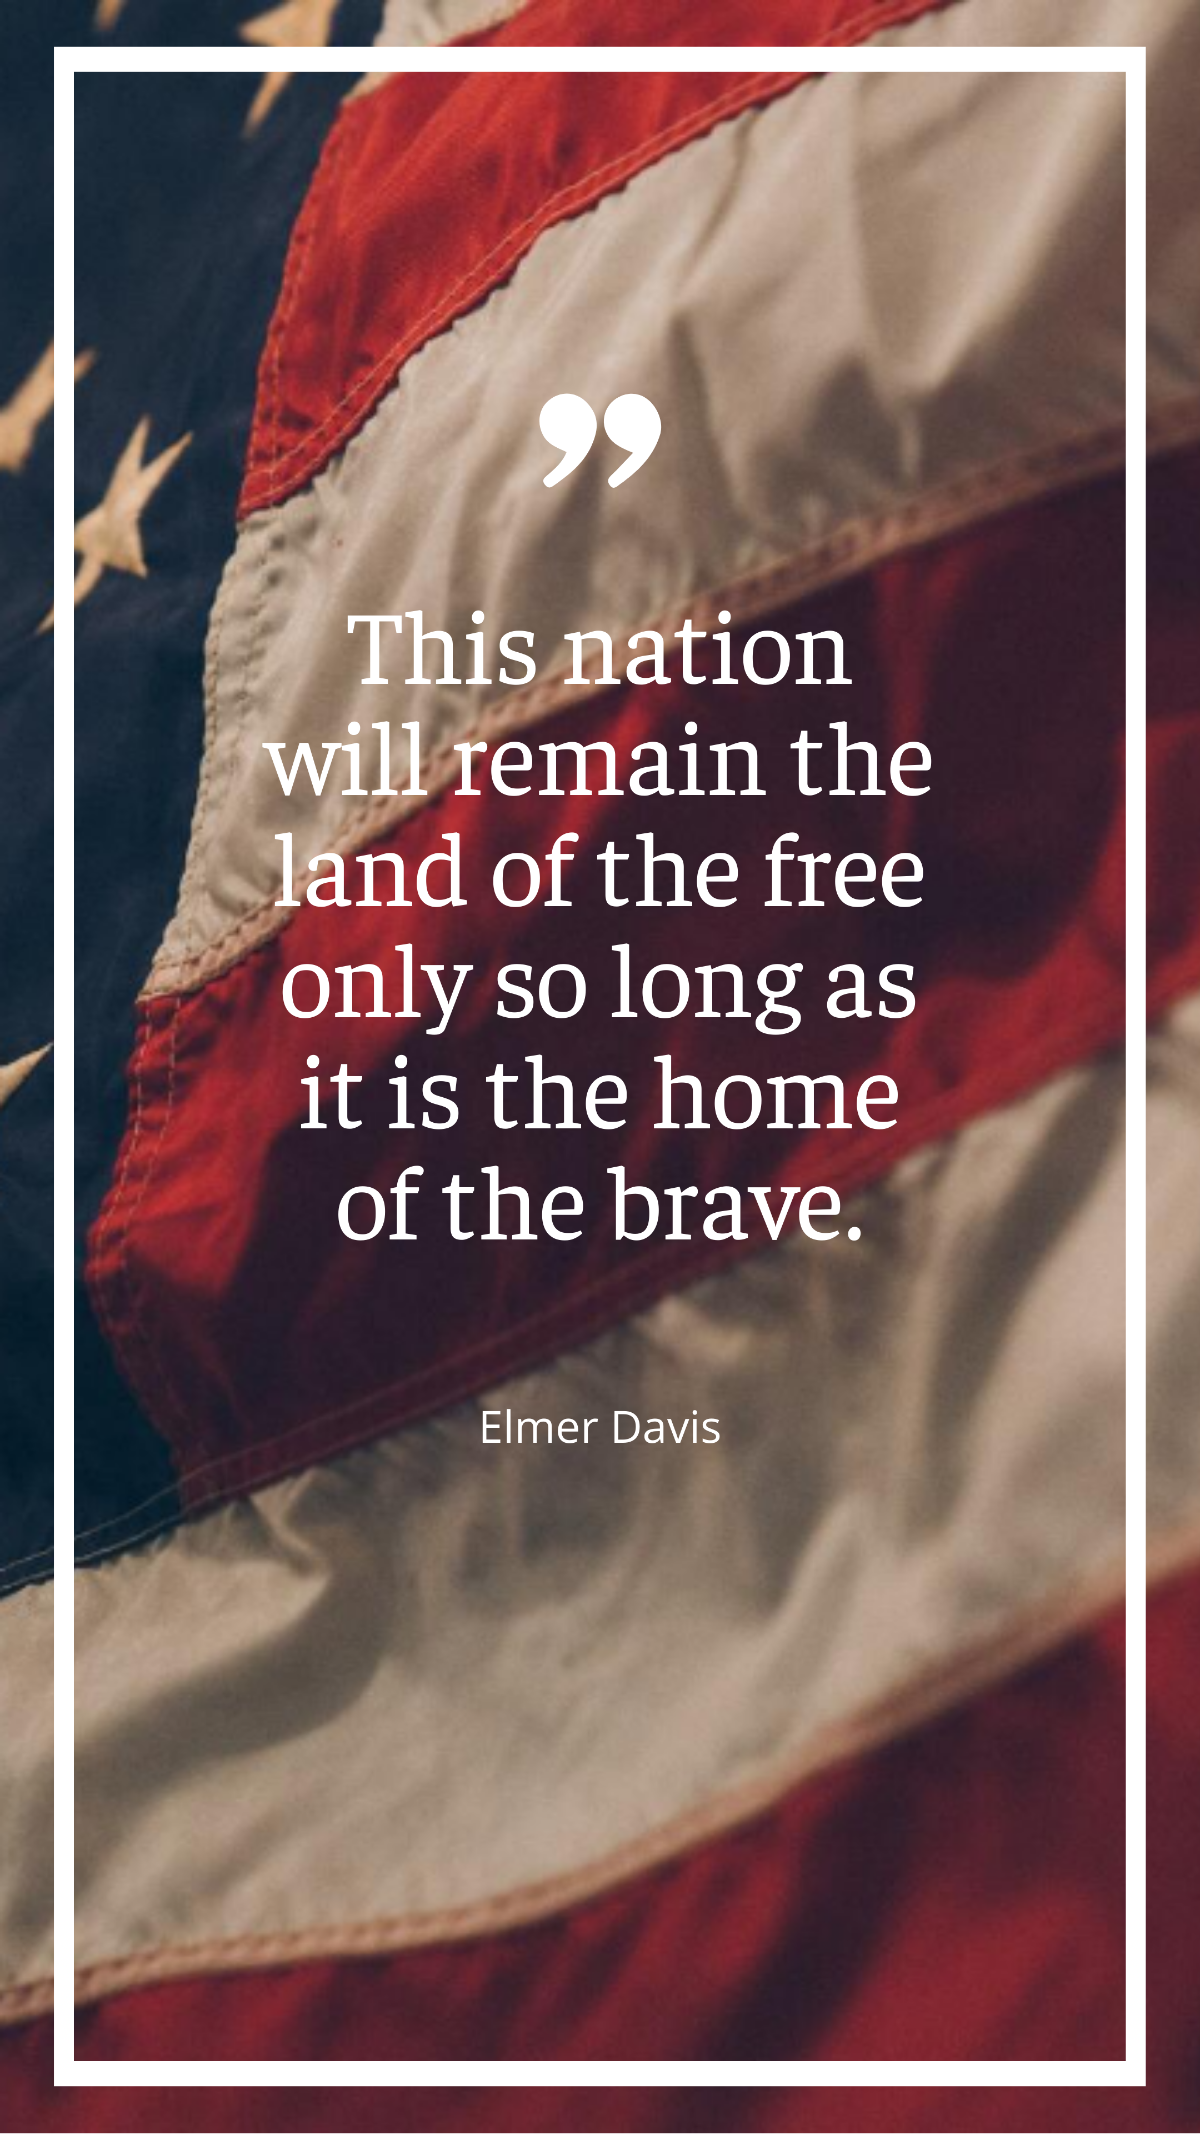 Elmer Davis - “This nation will remain the land of the only so long as ...